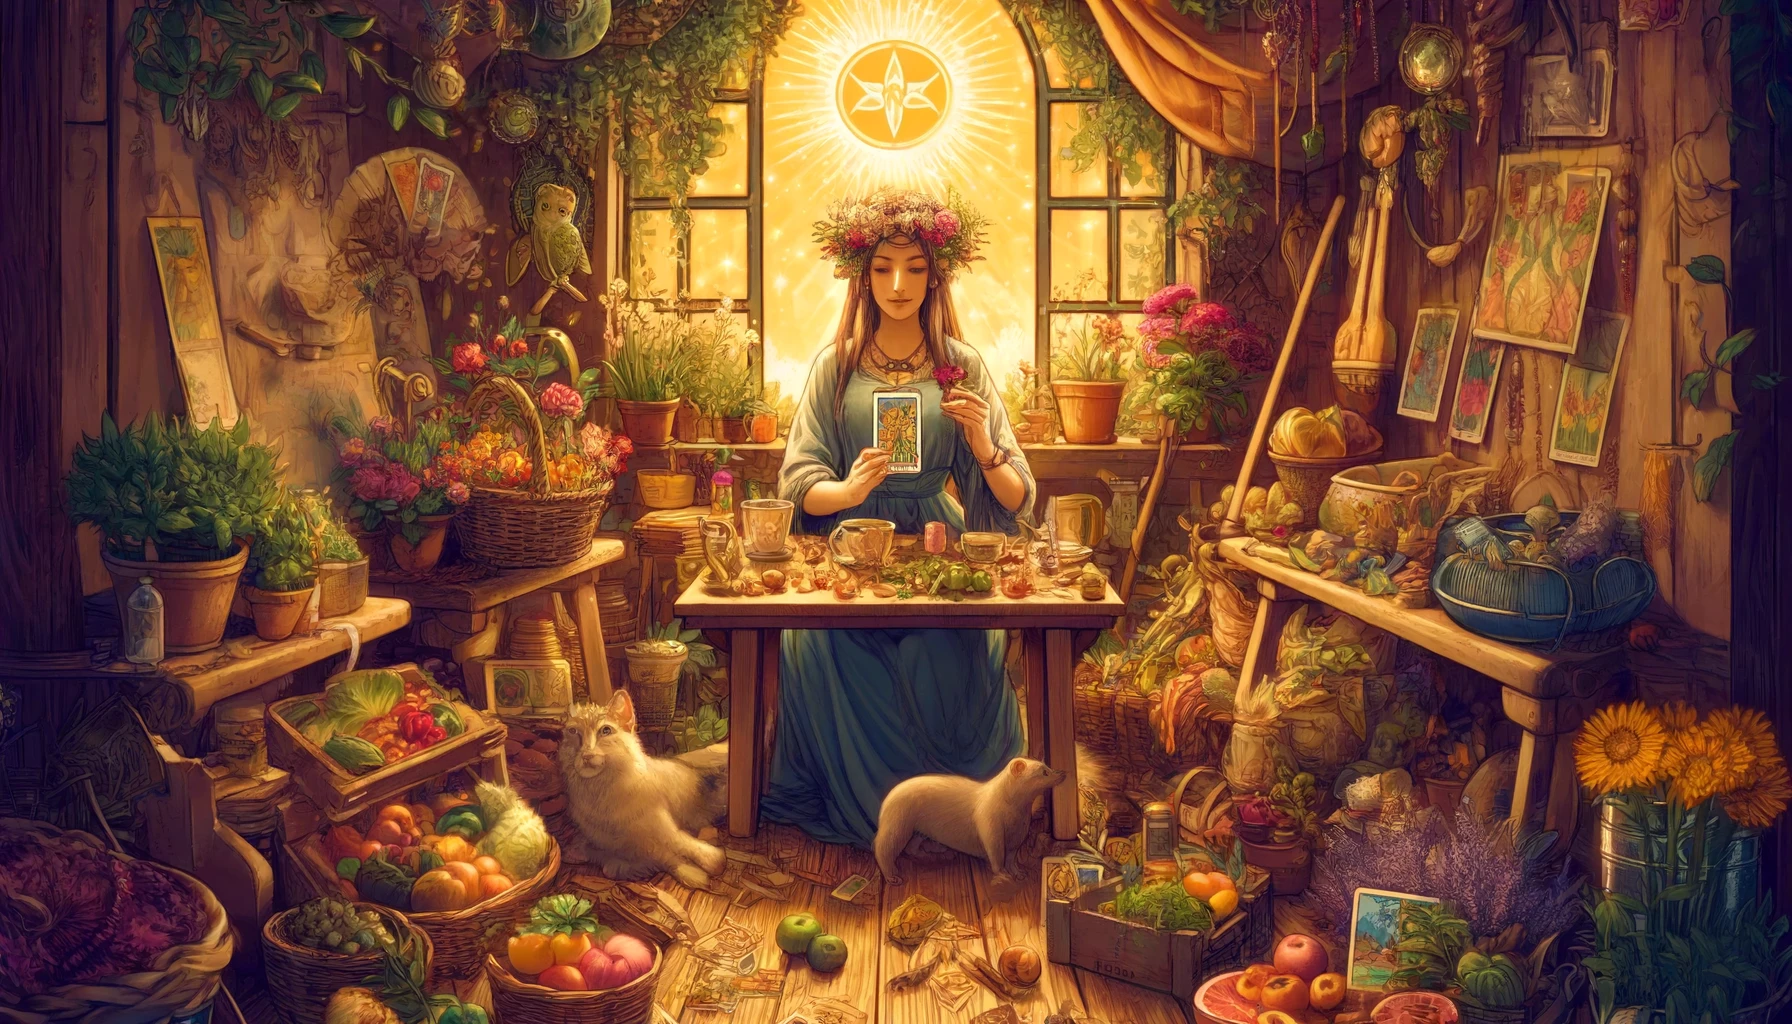 An illustration of the Upright Queen of Pentacles seated comfortably amidst a lush garden. She is depicted as a nurturing figure, radiating warmth and stability. The Queen holds a pentacle in one hand, symbolizing her practical approach to achieving abundance and prosperity. Surrounding her are vibrant flowers, flourishing trees, and fertile soil, indicating her ability to nurture and cultivate growth in all aspects of life. The scene exudes a sense of tranquility, abundance, and harmony with nature, reflecting the Queen's connection to the earth and her role as a provider and caretaker.